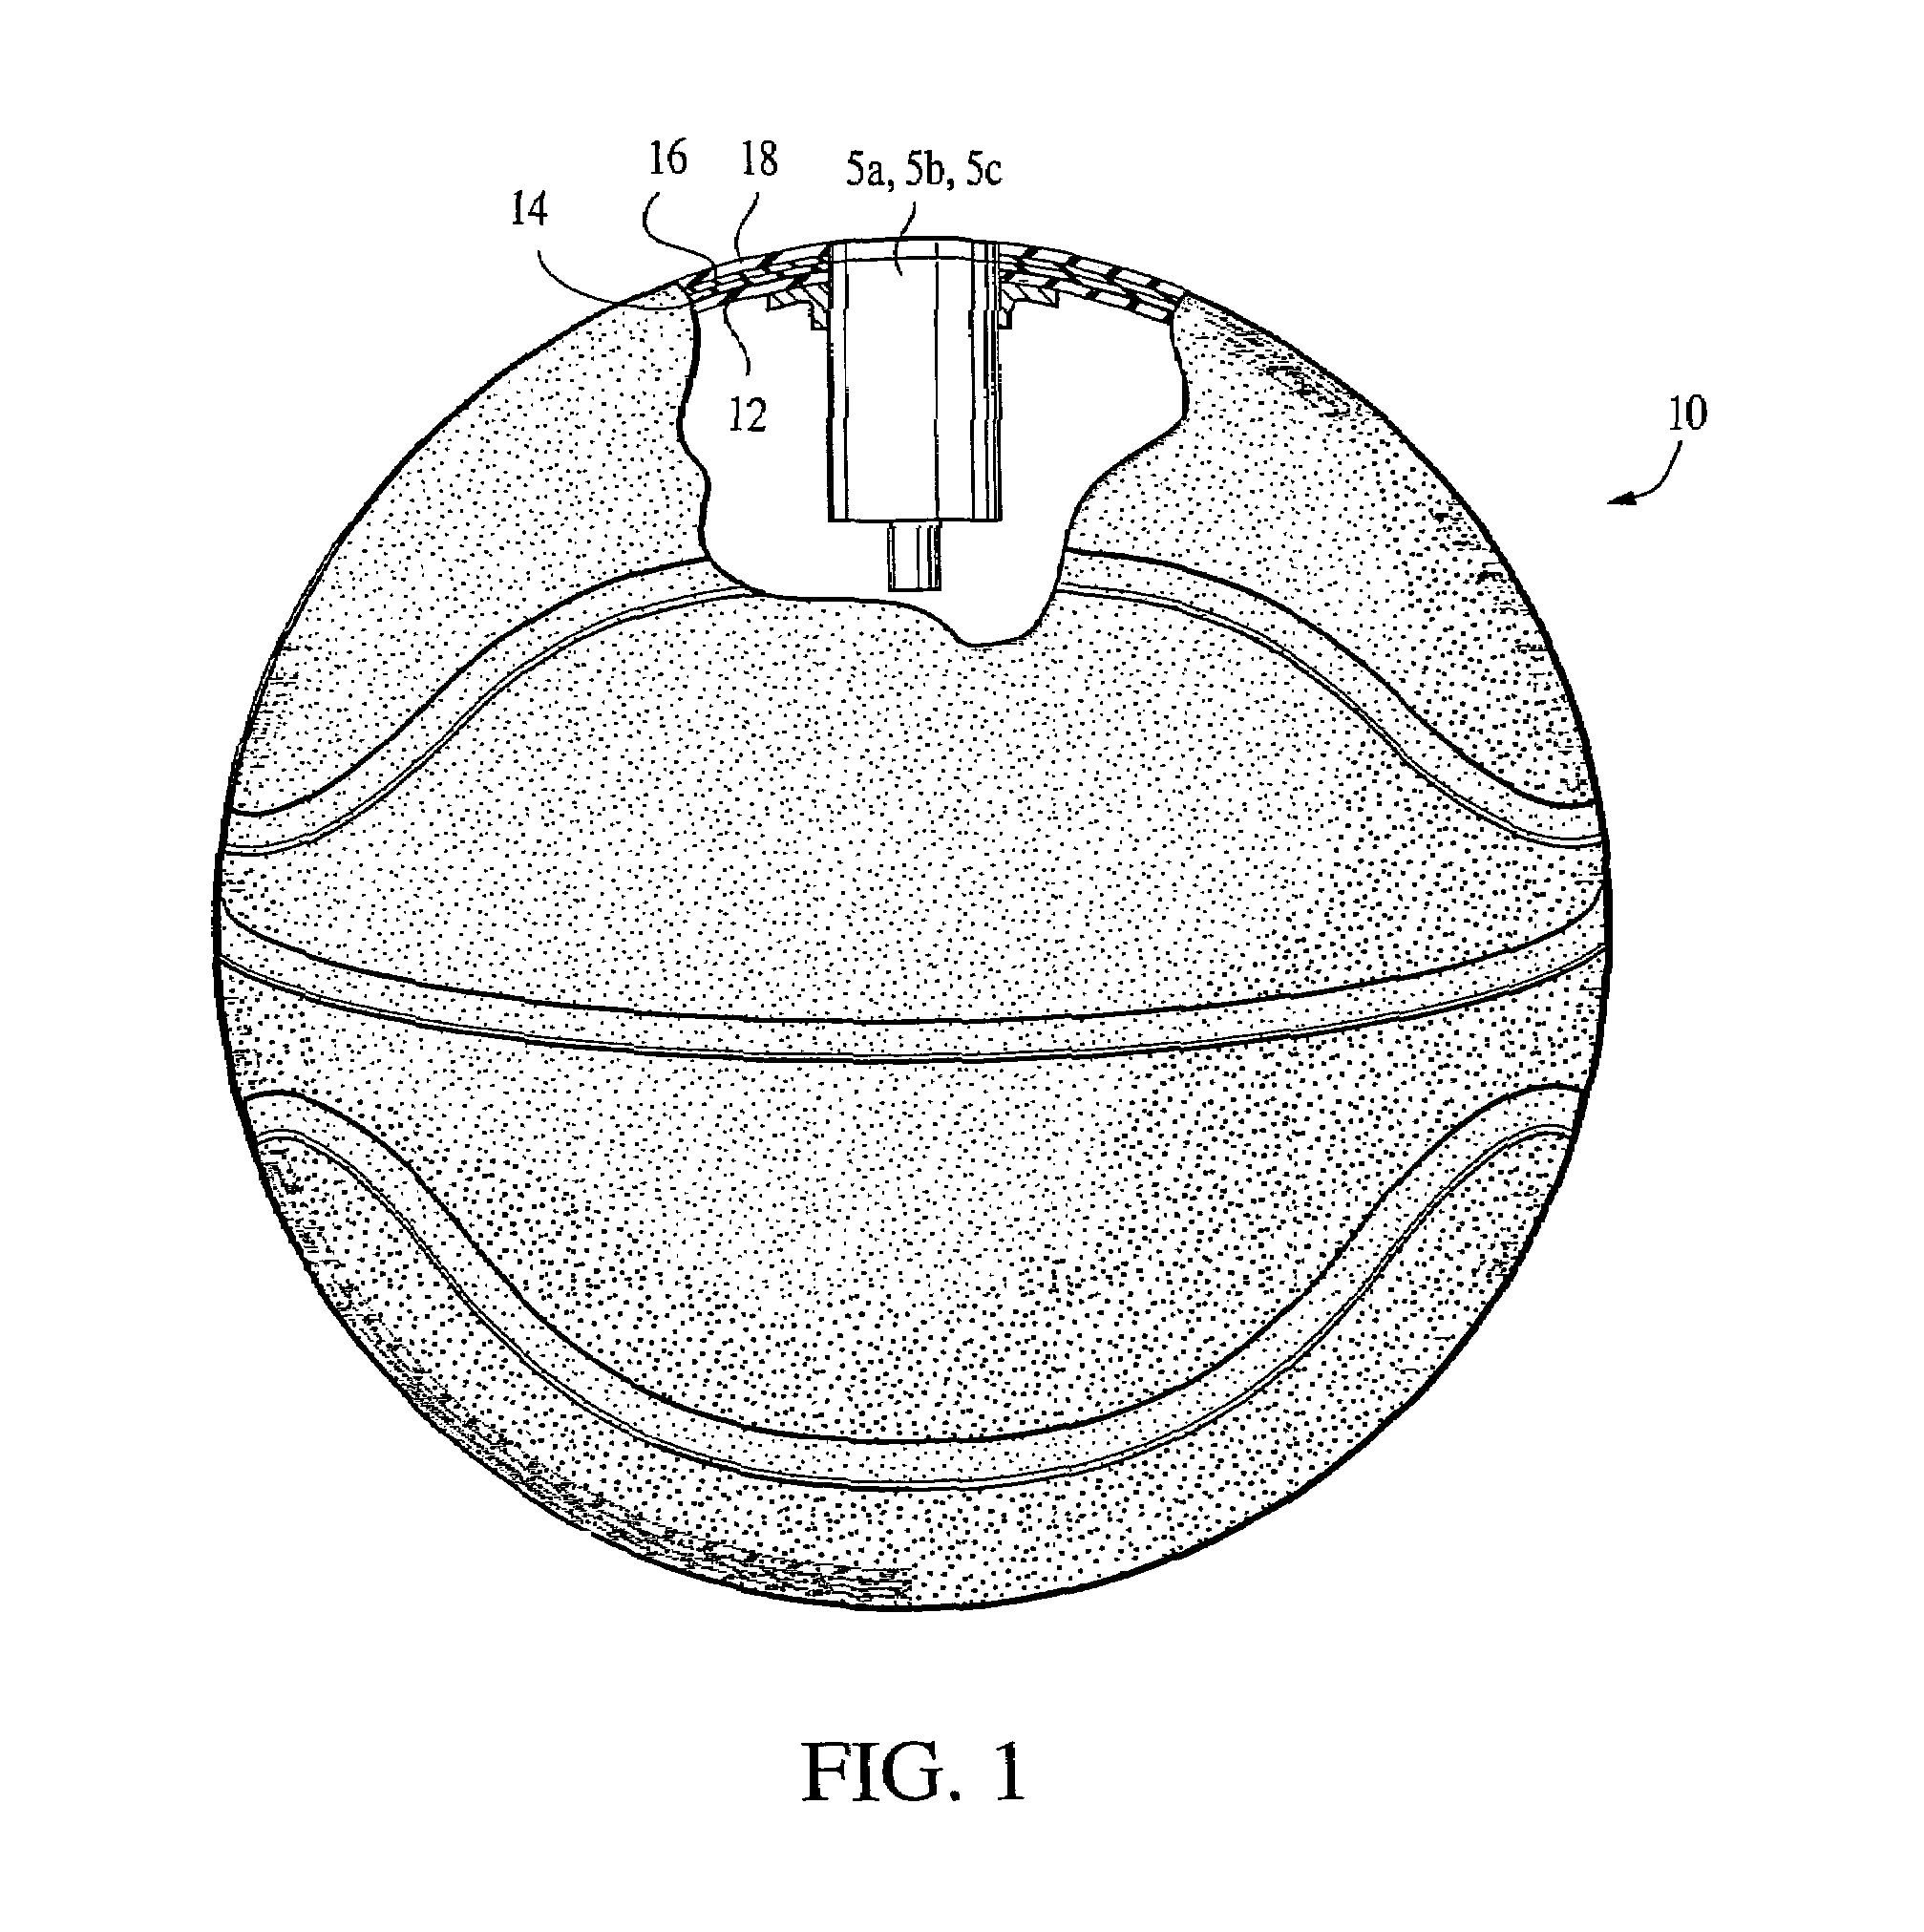 Sport ball with self-contained inflation mechanism having pressure relief and indication capability